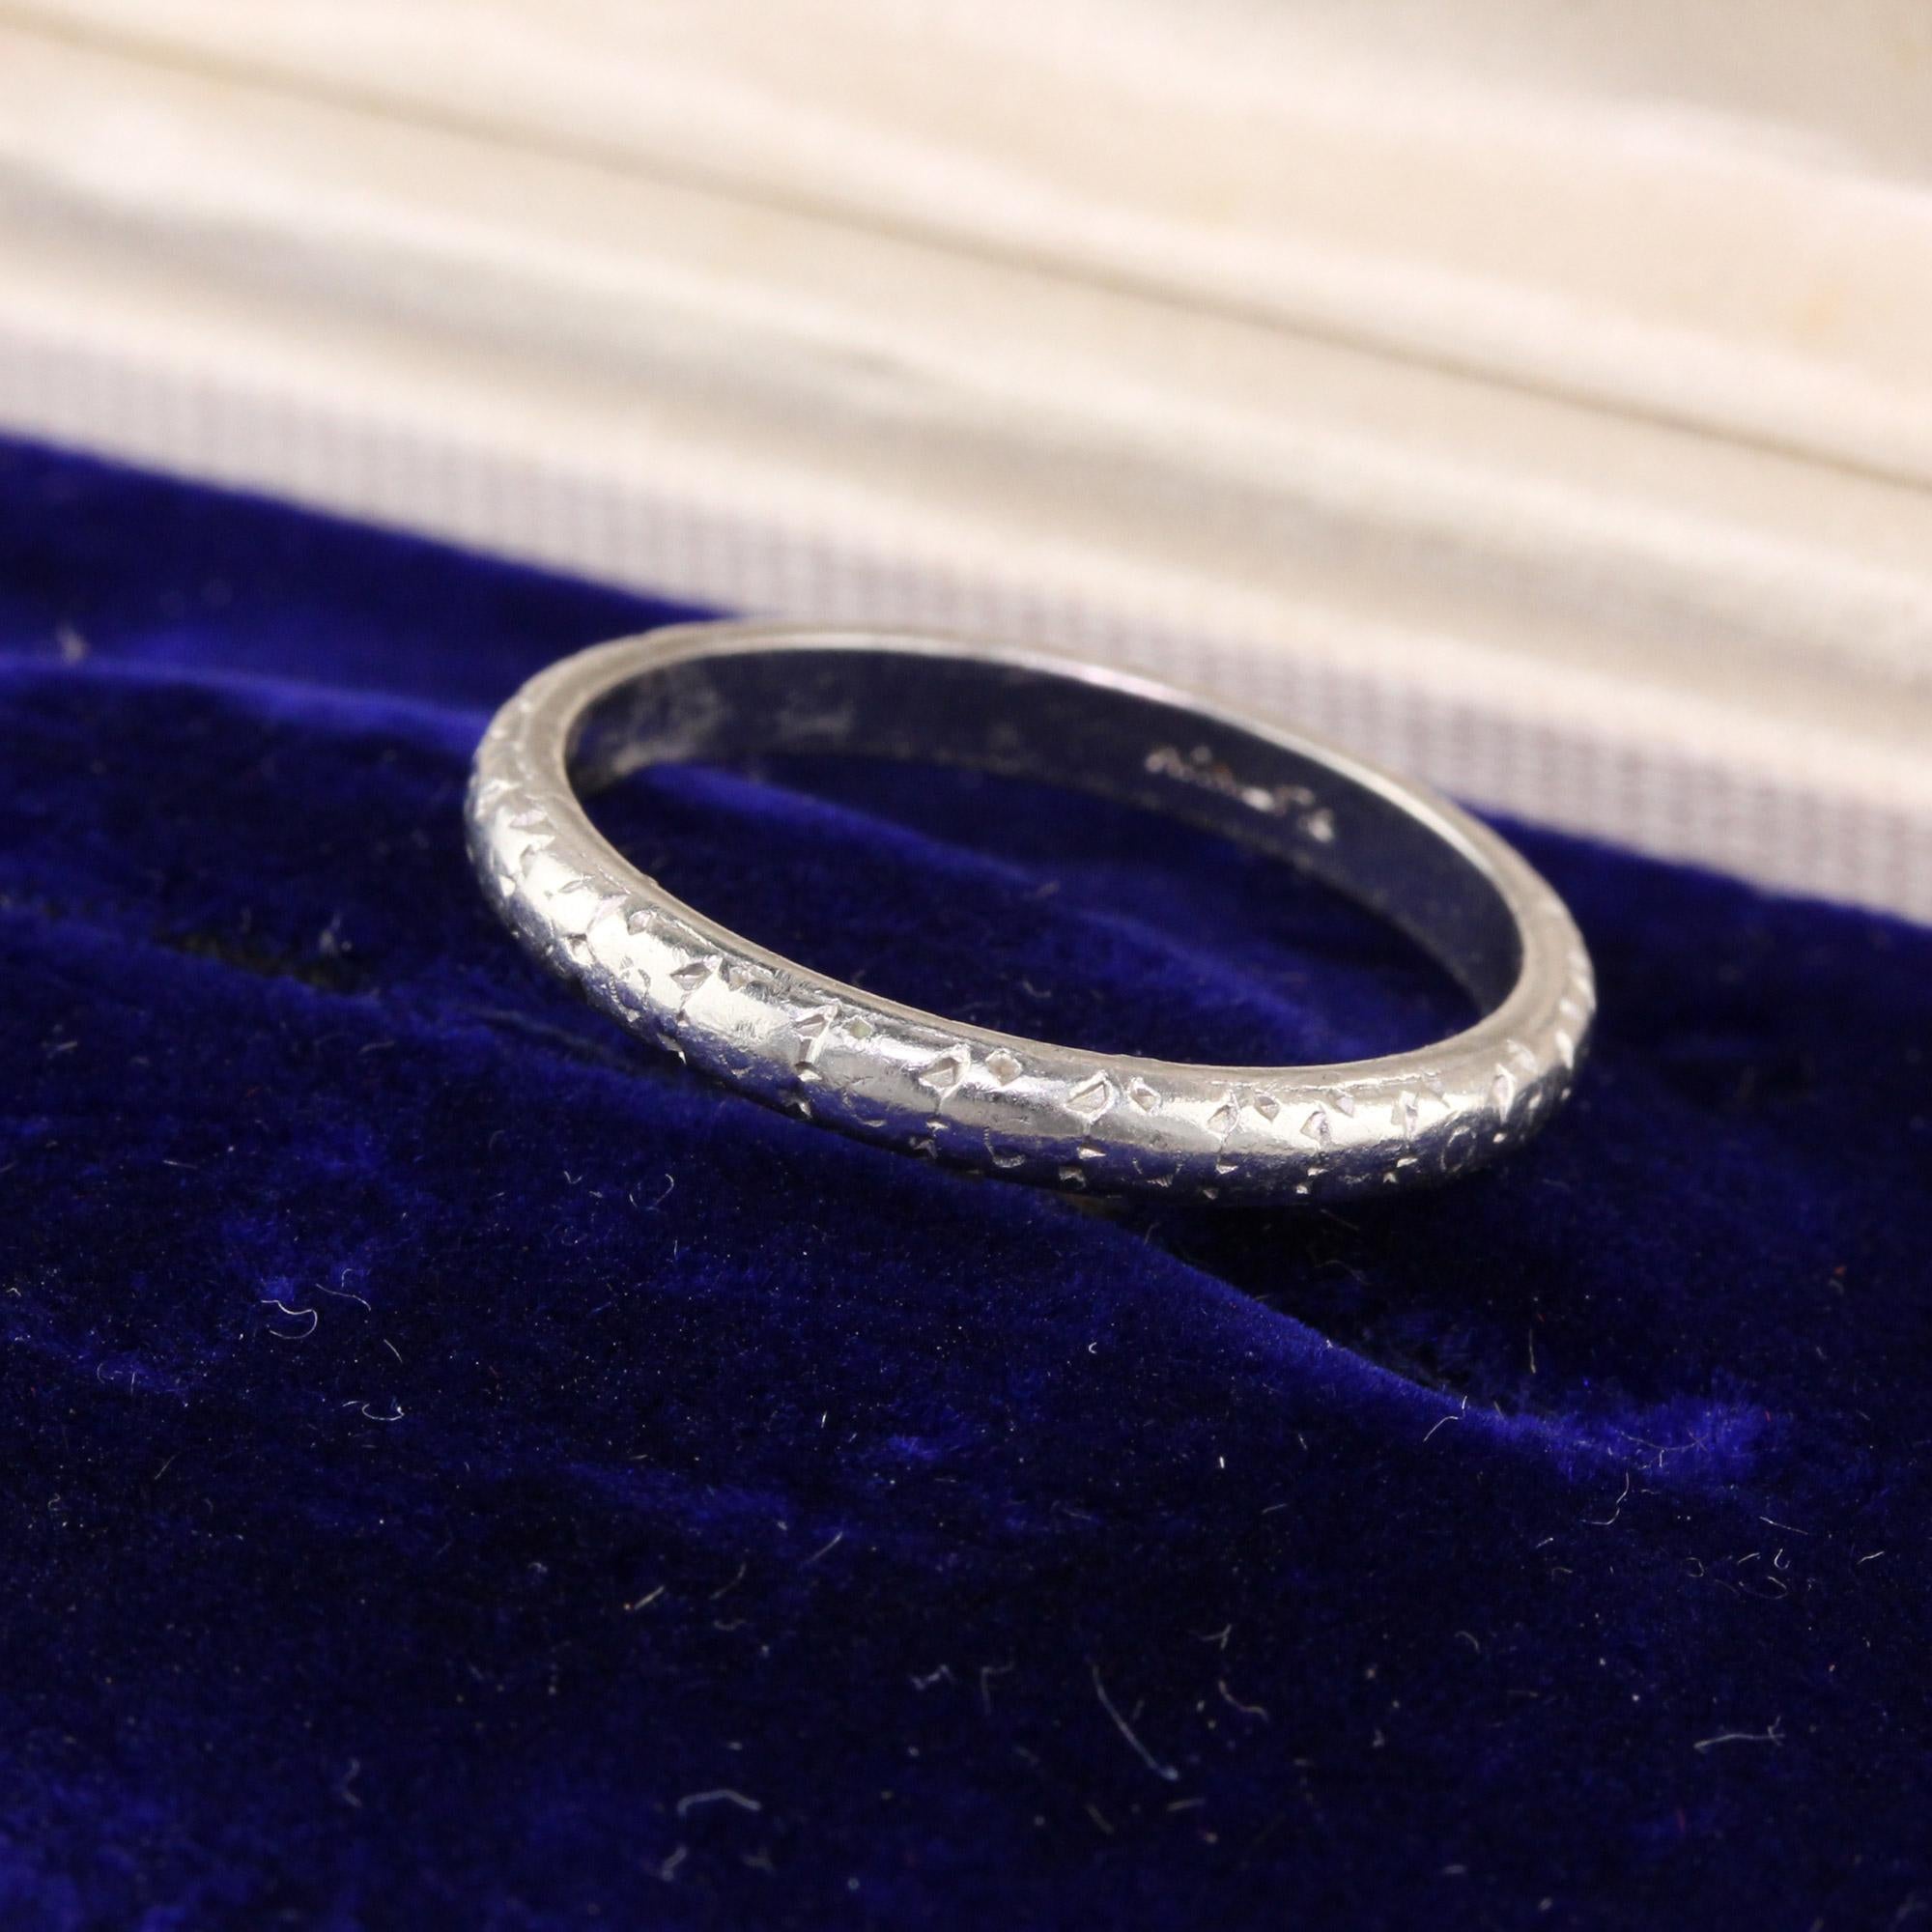 This is a Art Deco Platinum Wedding Band with faint engravings going all the way around. Unisex!

#R0257

Metal: Platinum

Weight: 3.5 Grams

Ring Size: 7

*Unfortunately this ring cannot be sized.

Measurements: 2.5 mm wide

Measurement from finger